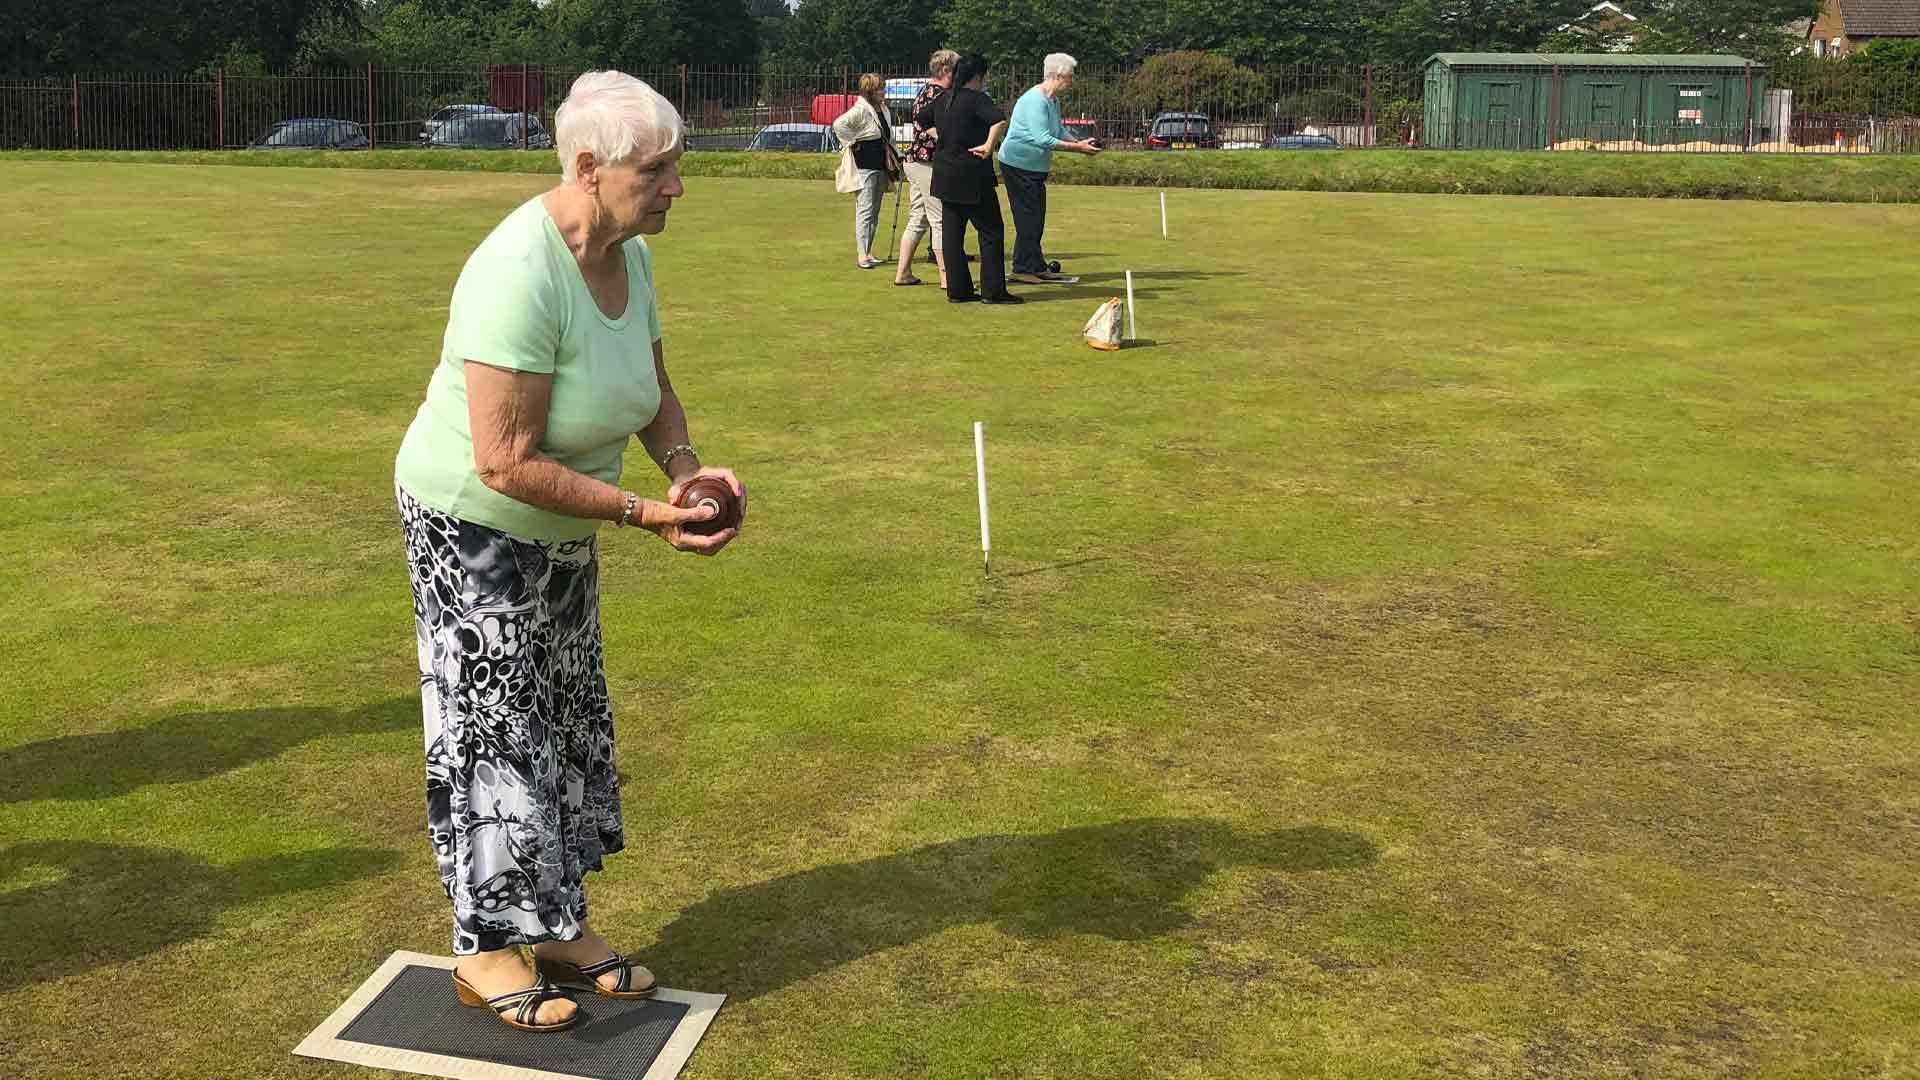 resident playing bowls